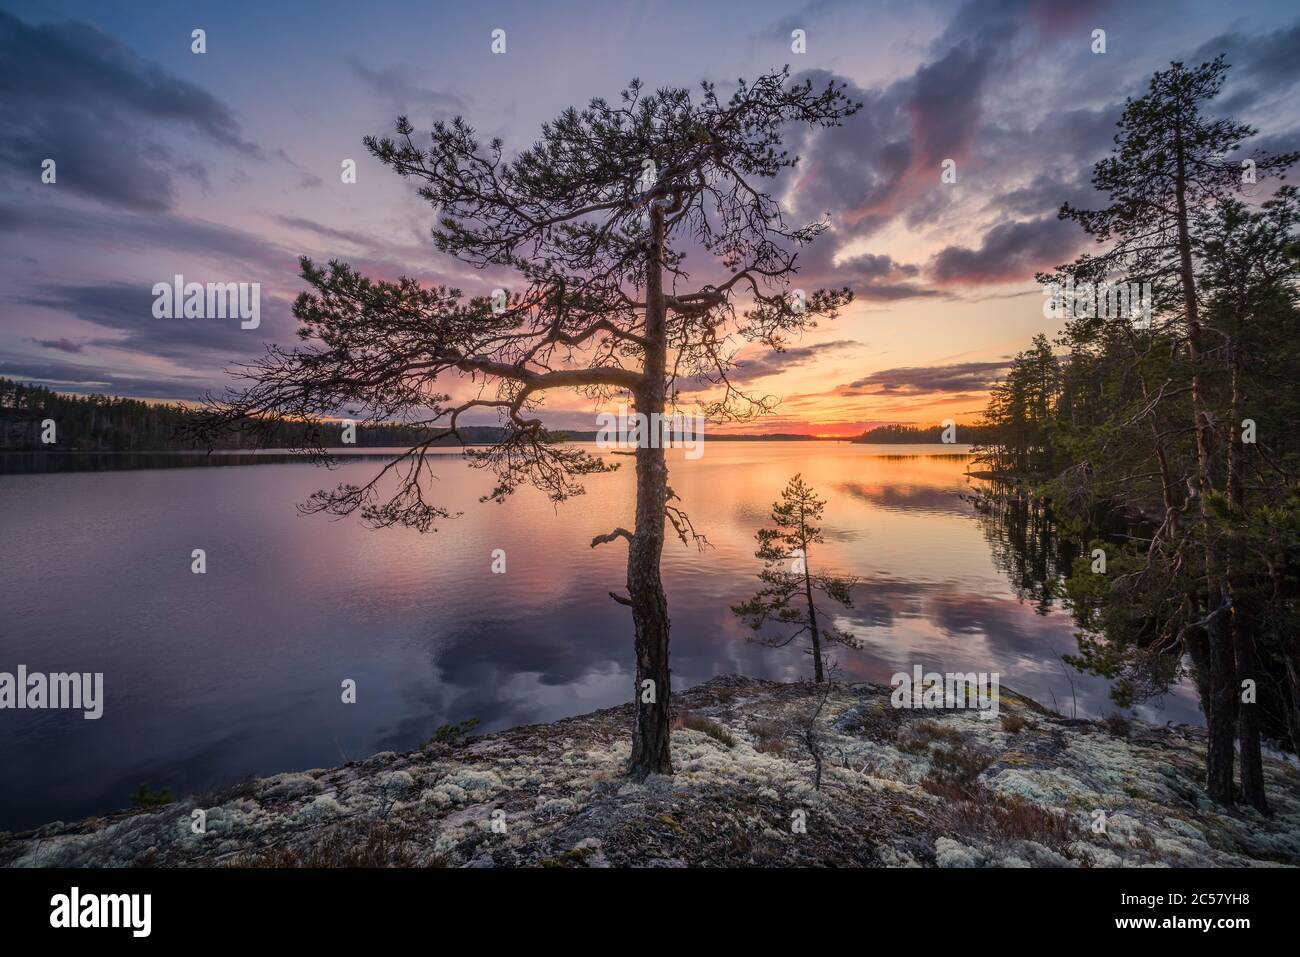 Scenic sunset landscape with peaceful lake and tree at summer evening in Finland Stock Photo